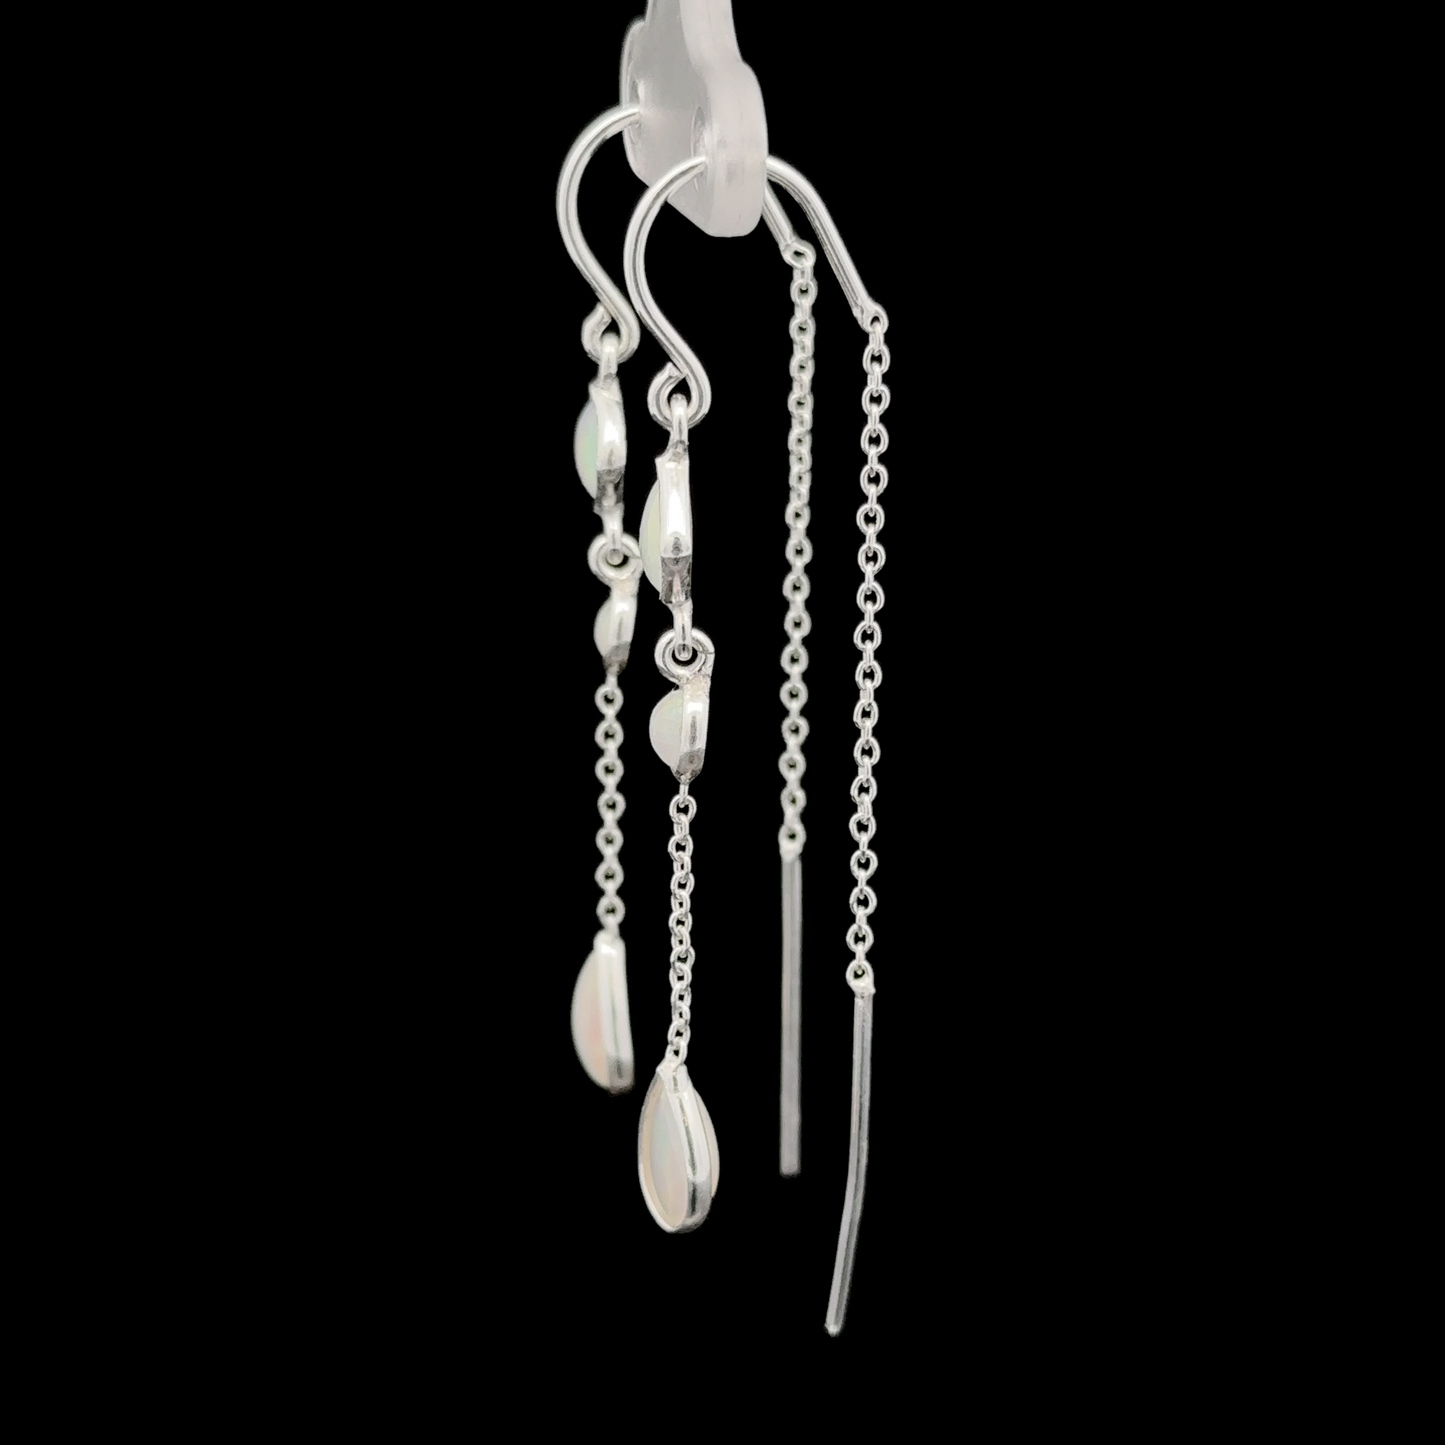 
                  
                    Pair of Ethiopian Opal Threader Earrings with chain and bead detailing, showcasing contemporary design in sterling silver jewelry against a black background.
                  
                